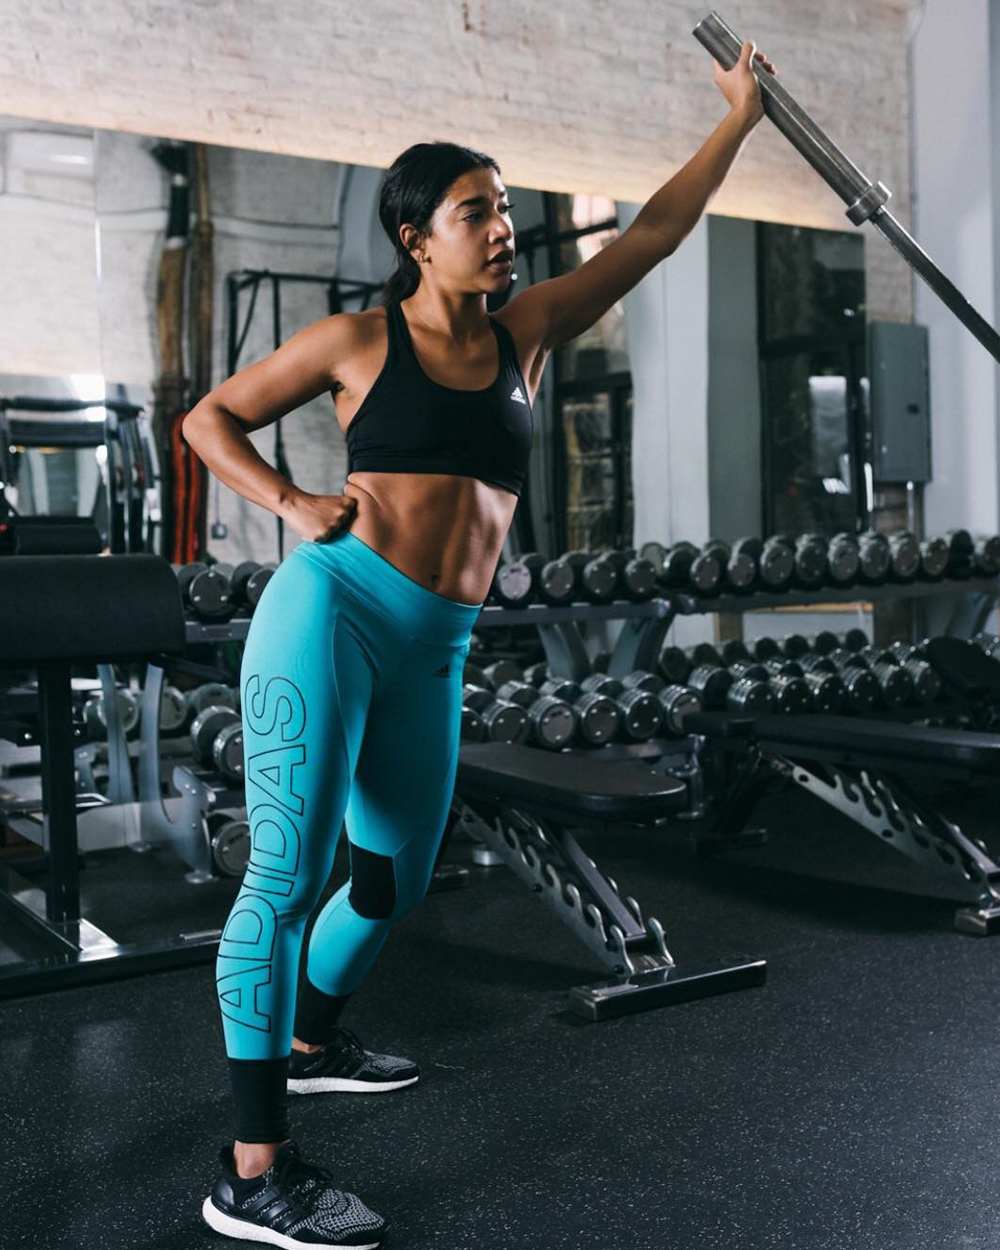 This is the main reason women are working out - and it's not